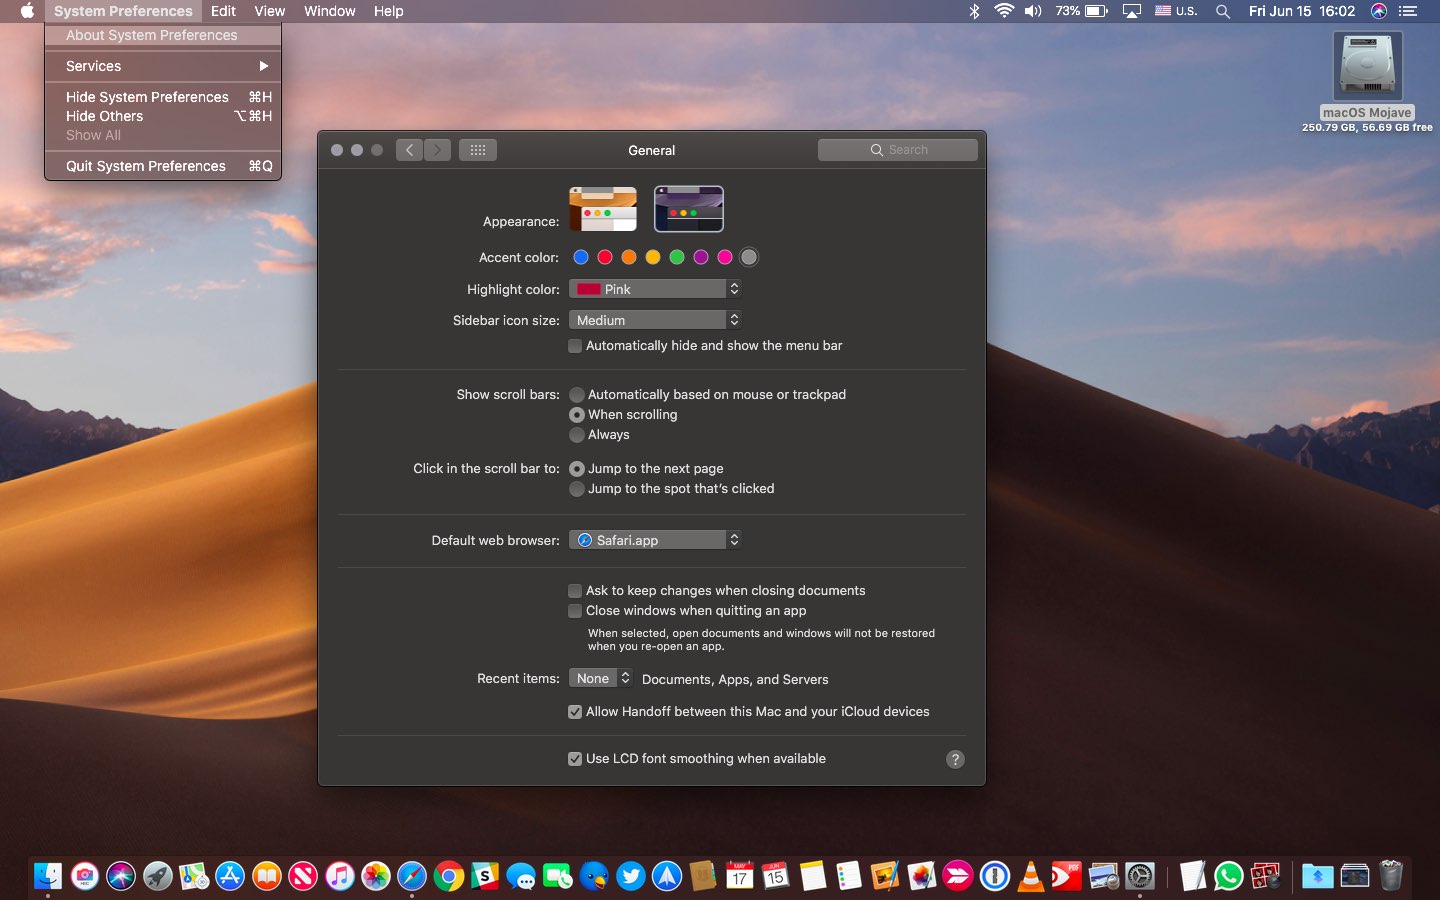 macOS Mojave Dark Mode with the gray accent and highlight color